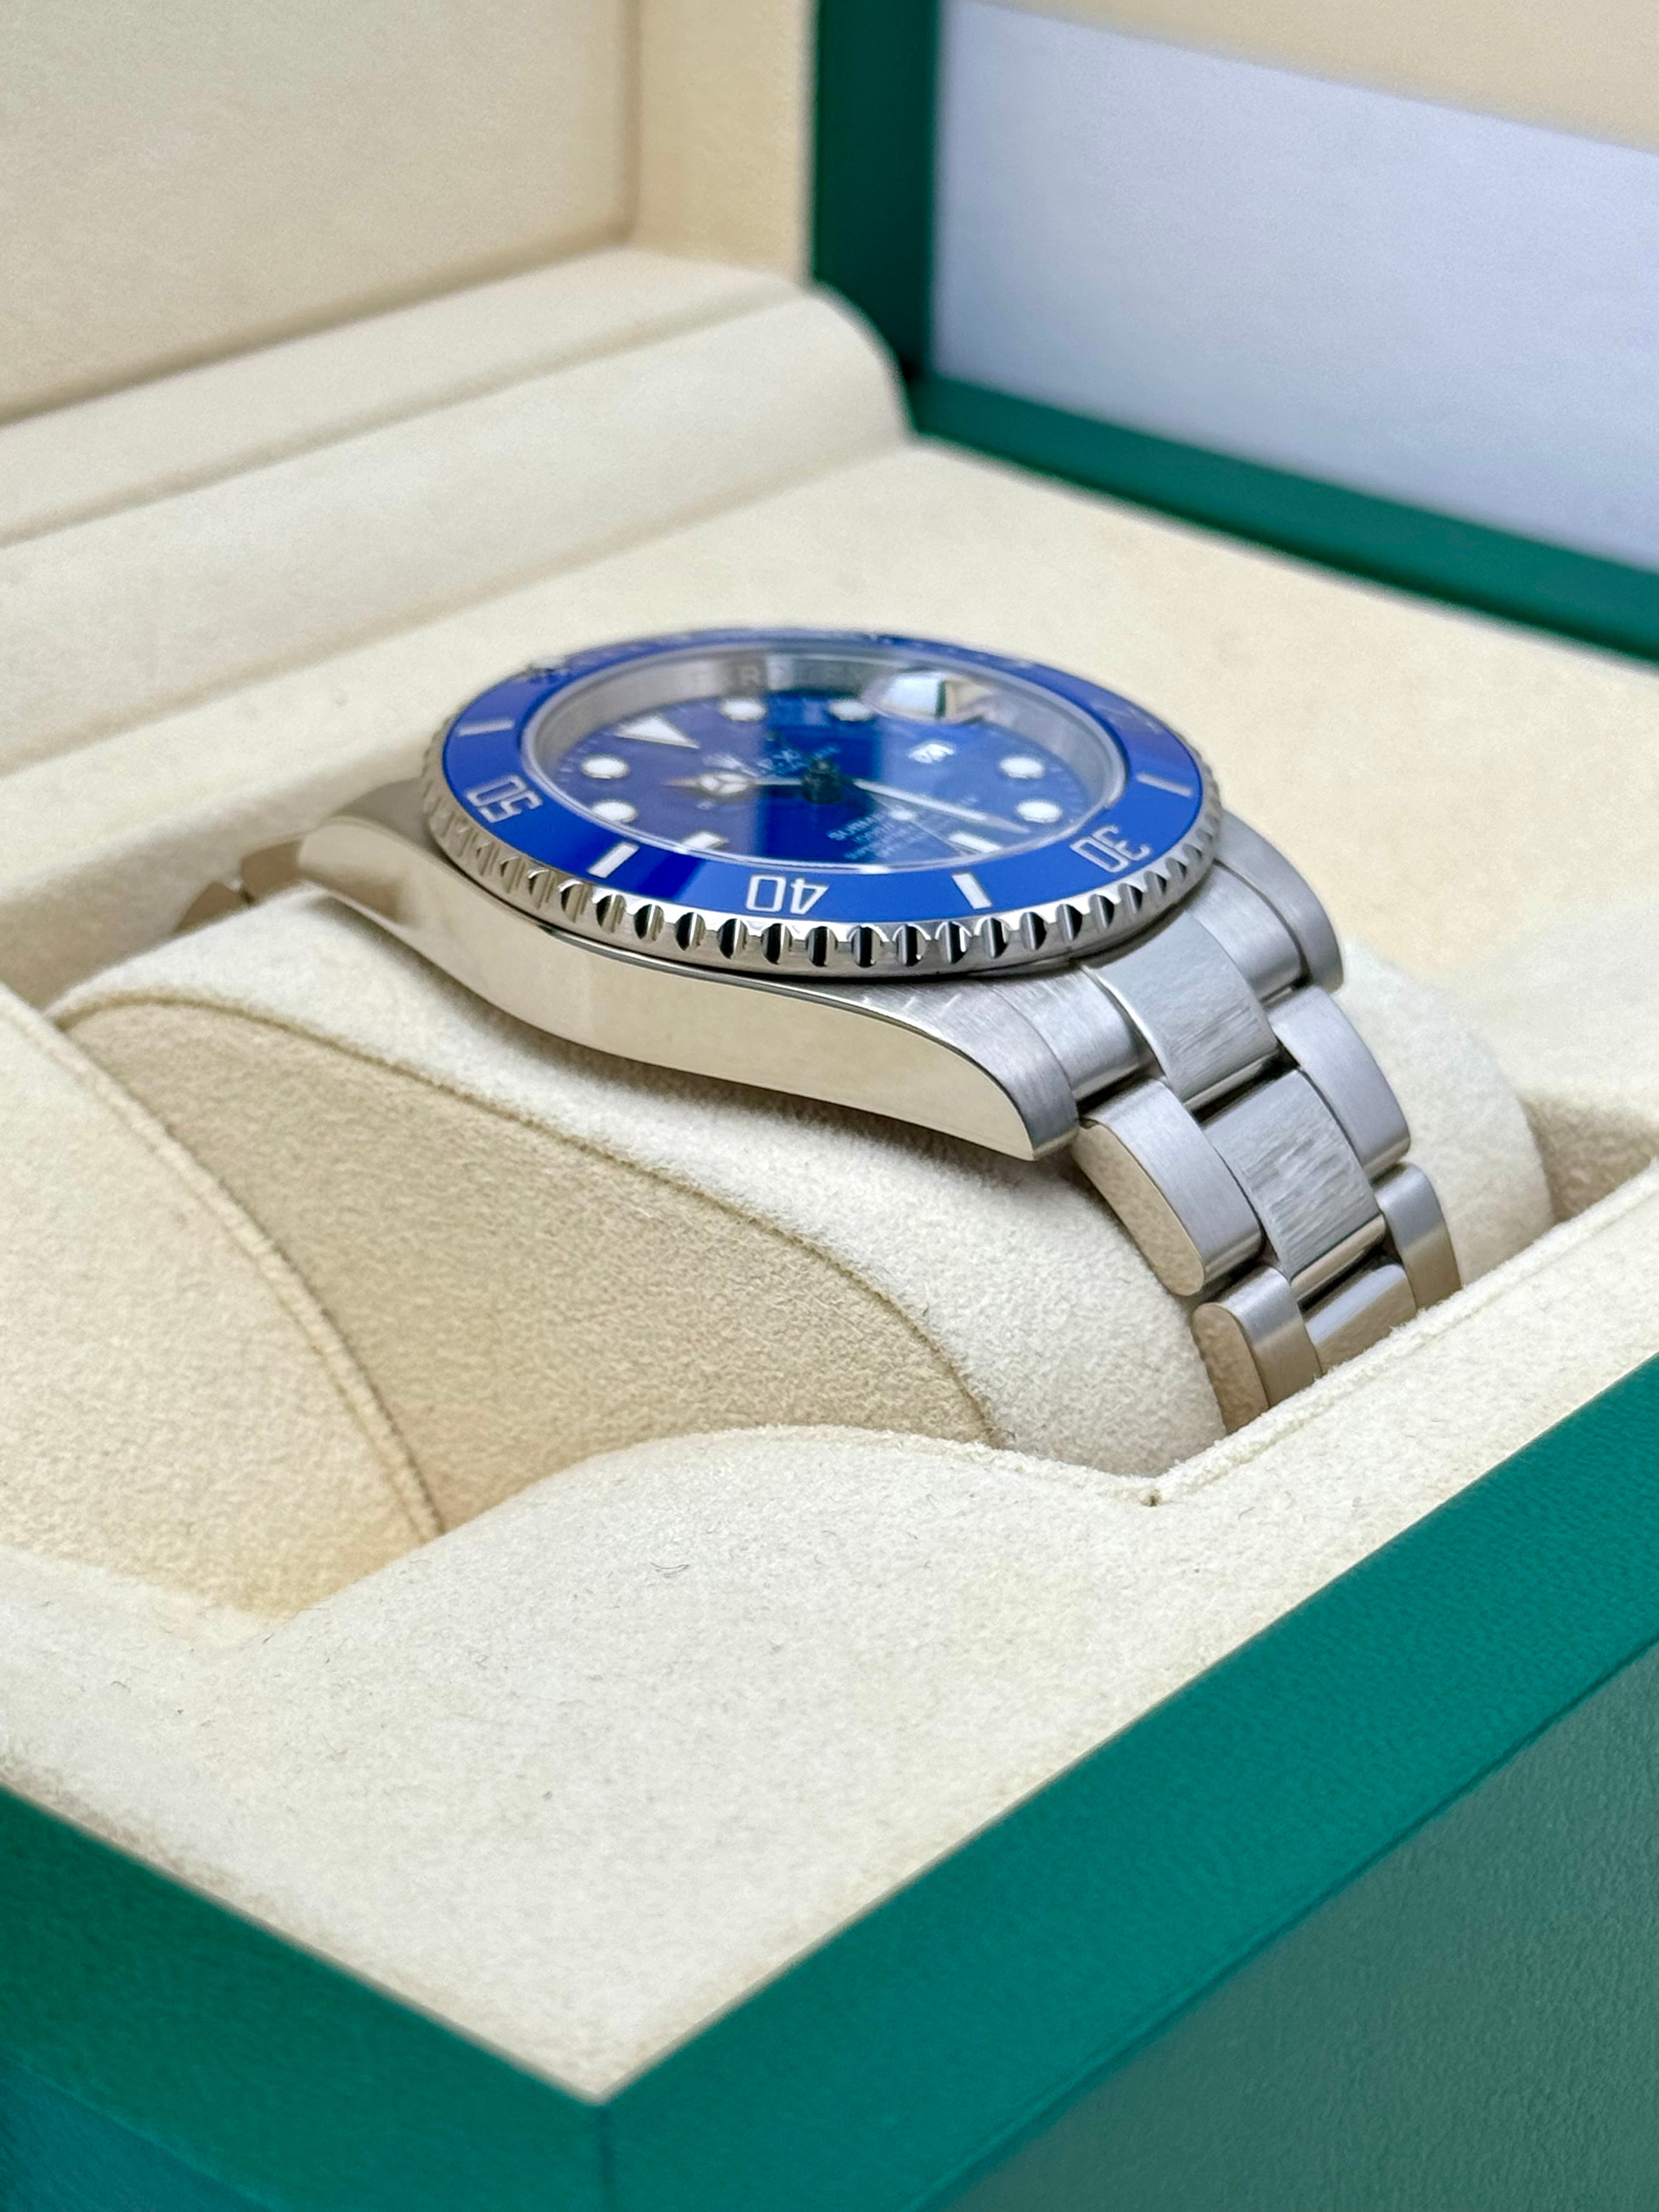 Rolex Submariner Date 41mm White Gold Smurf 126619LB Unworn 2023 for  $37,395 for sale from a Trusted Seller on Chrono24